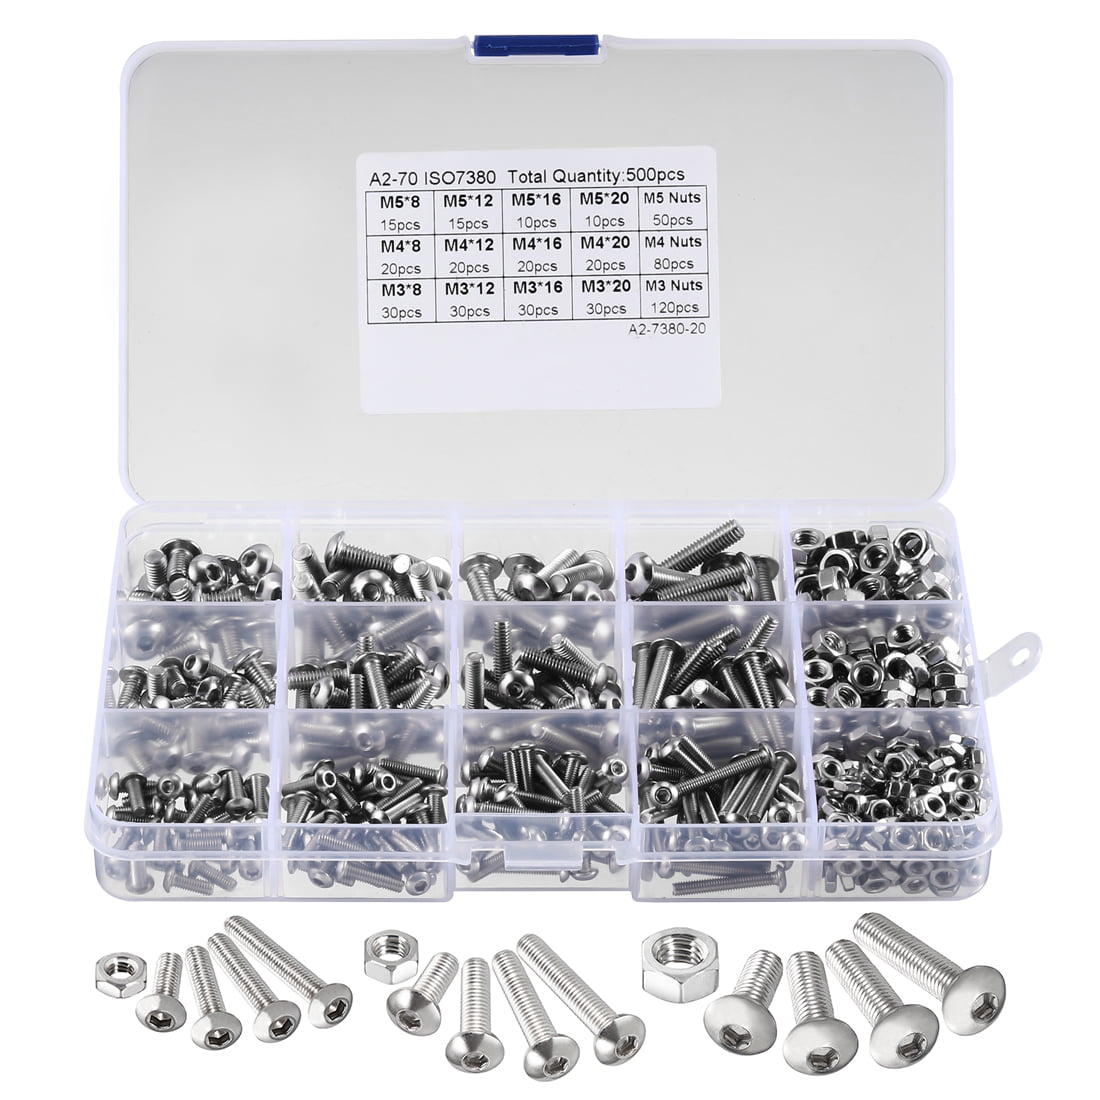 500pcs Assorted M3 M4 M5 Stainless Steel Hex Screws & Socket Bolts and Nuts Kit 